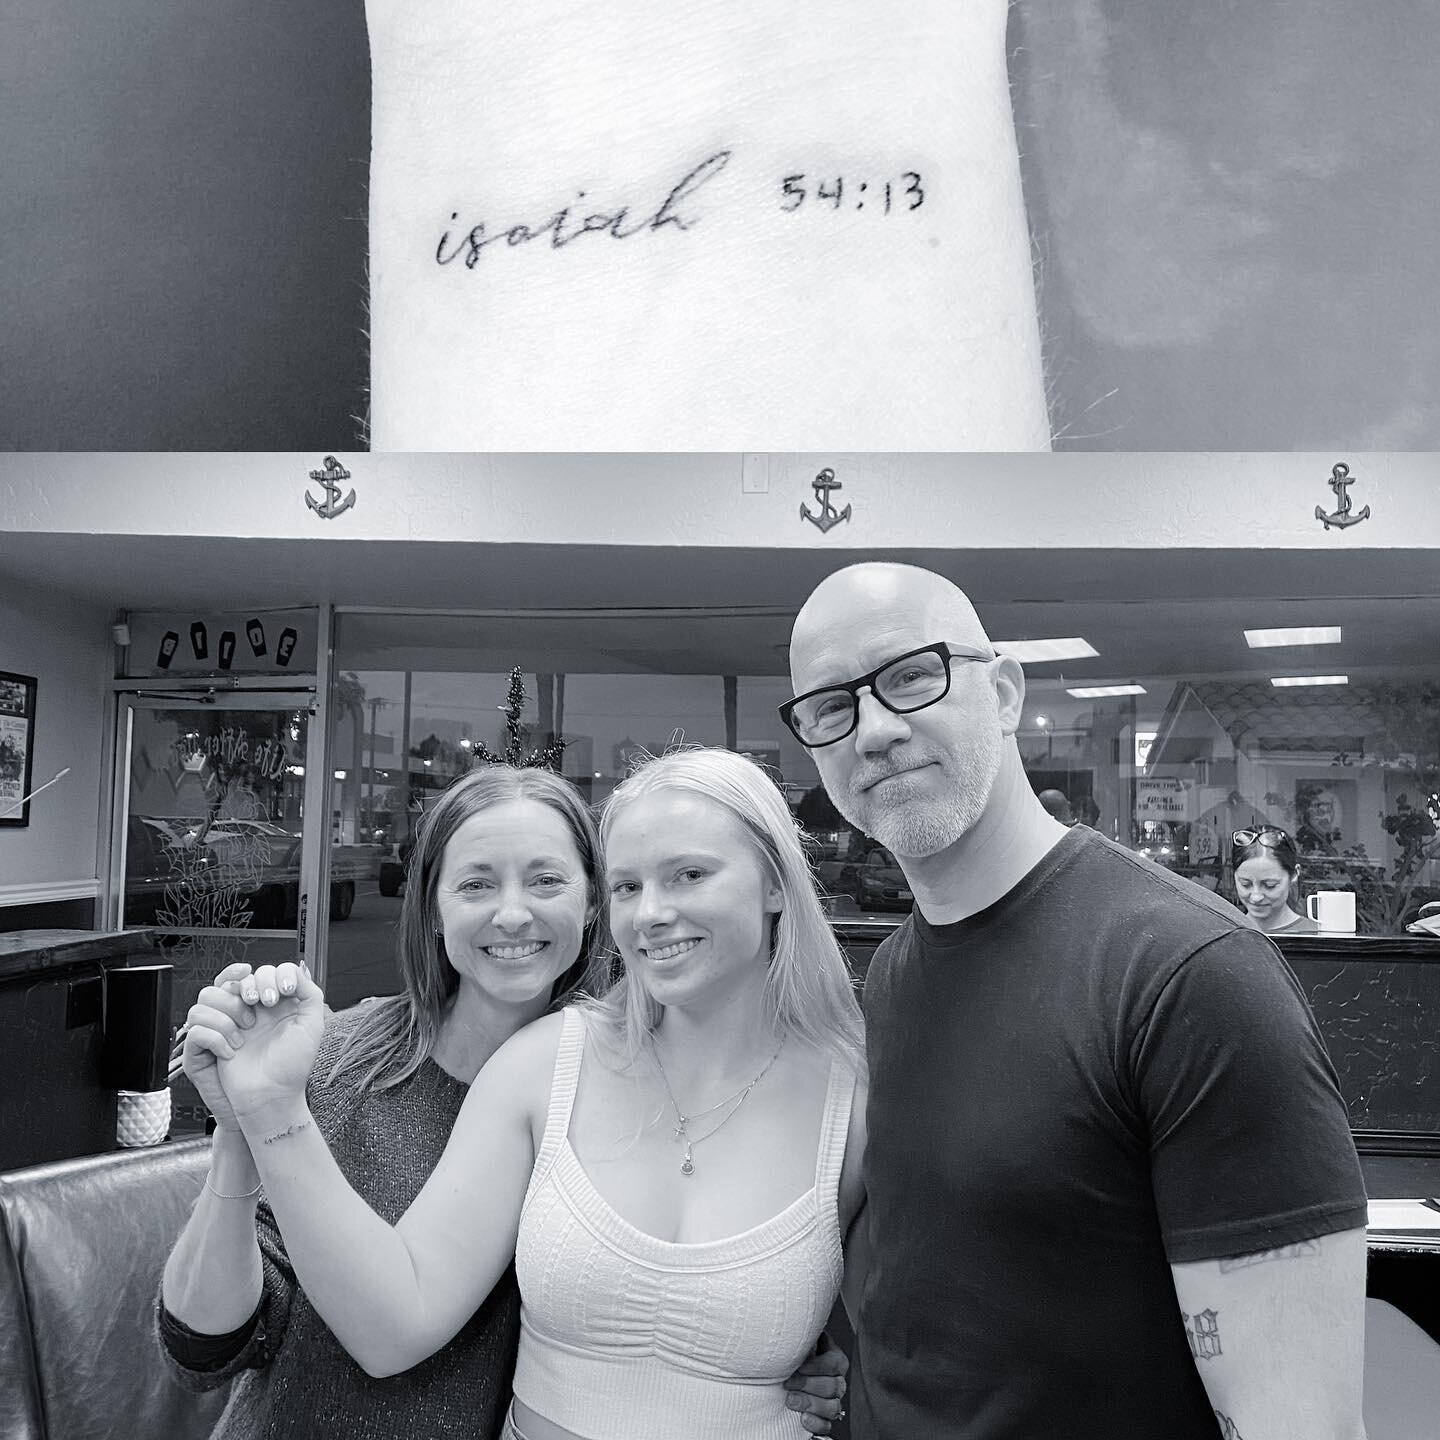 What an honor to be able to give this young lady her first tattoo&hellip; her life verse: Isaiah 54:13 

&ldquo;Thank you again! My younger daughter and I were amazed at how strongly we felt God&rsquo;s presence in that place. You are a blessing for 